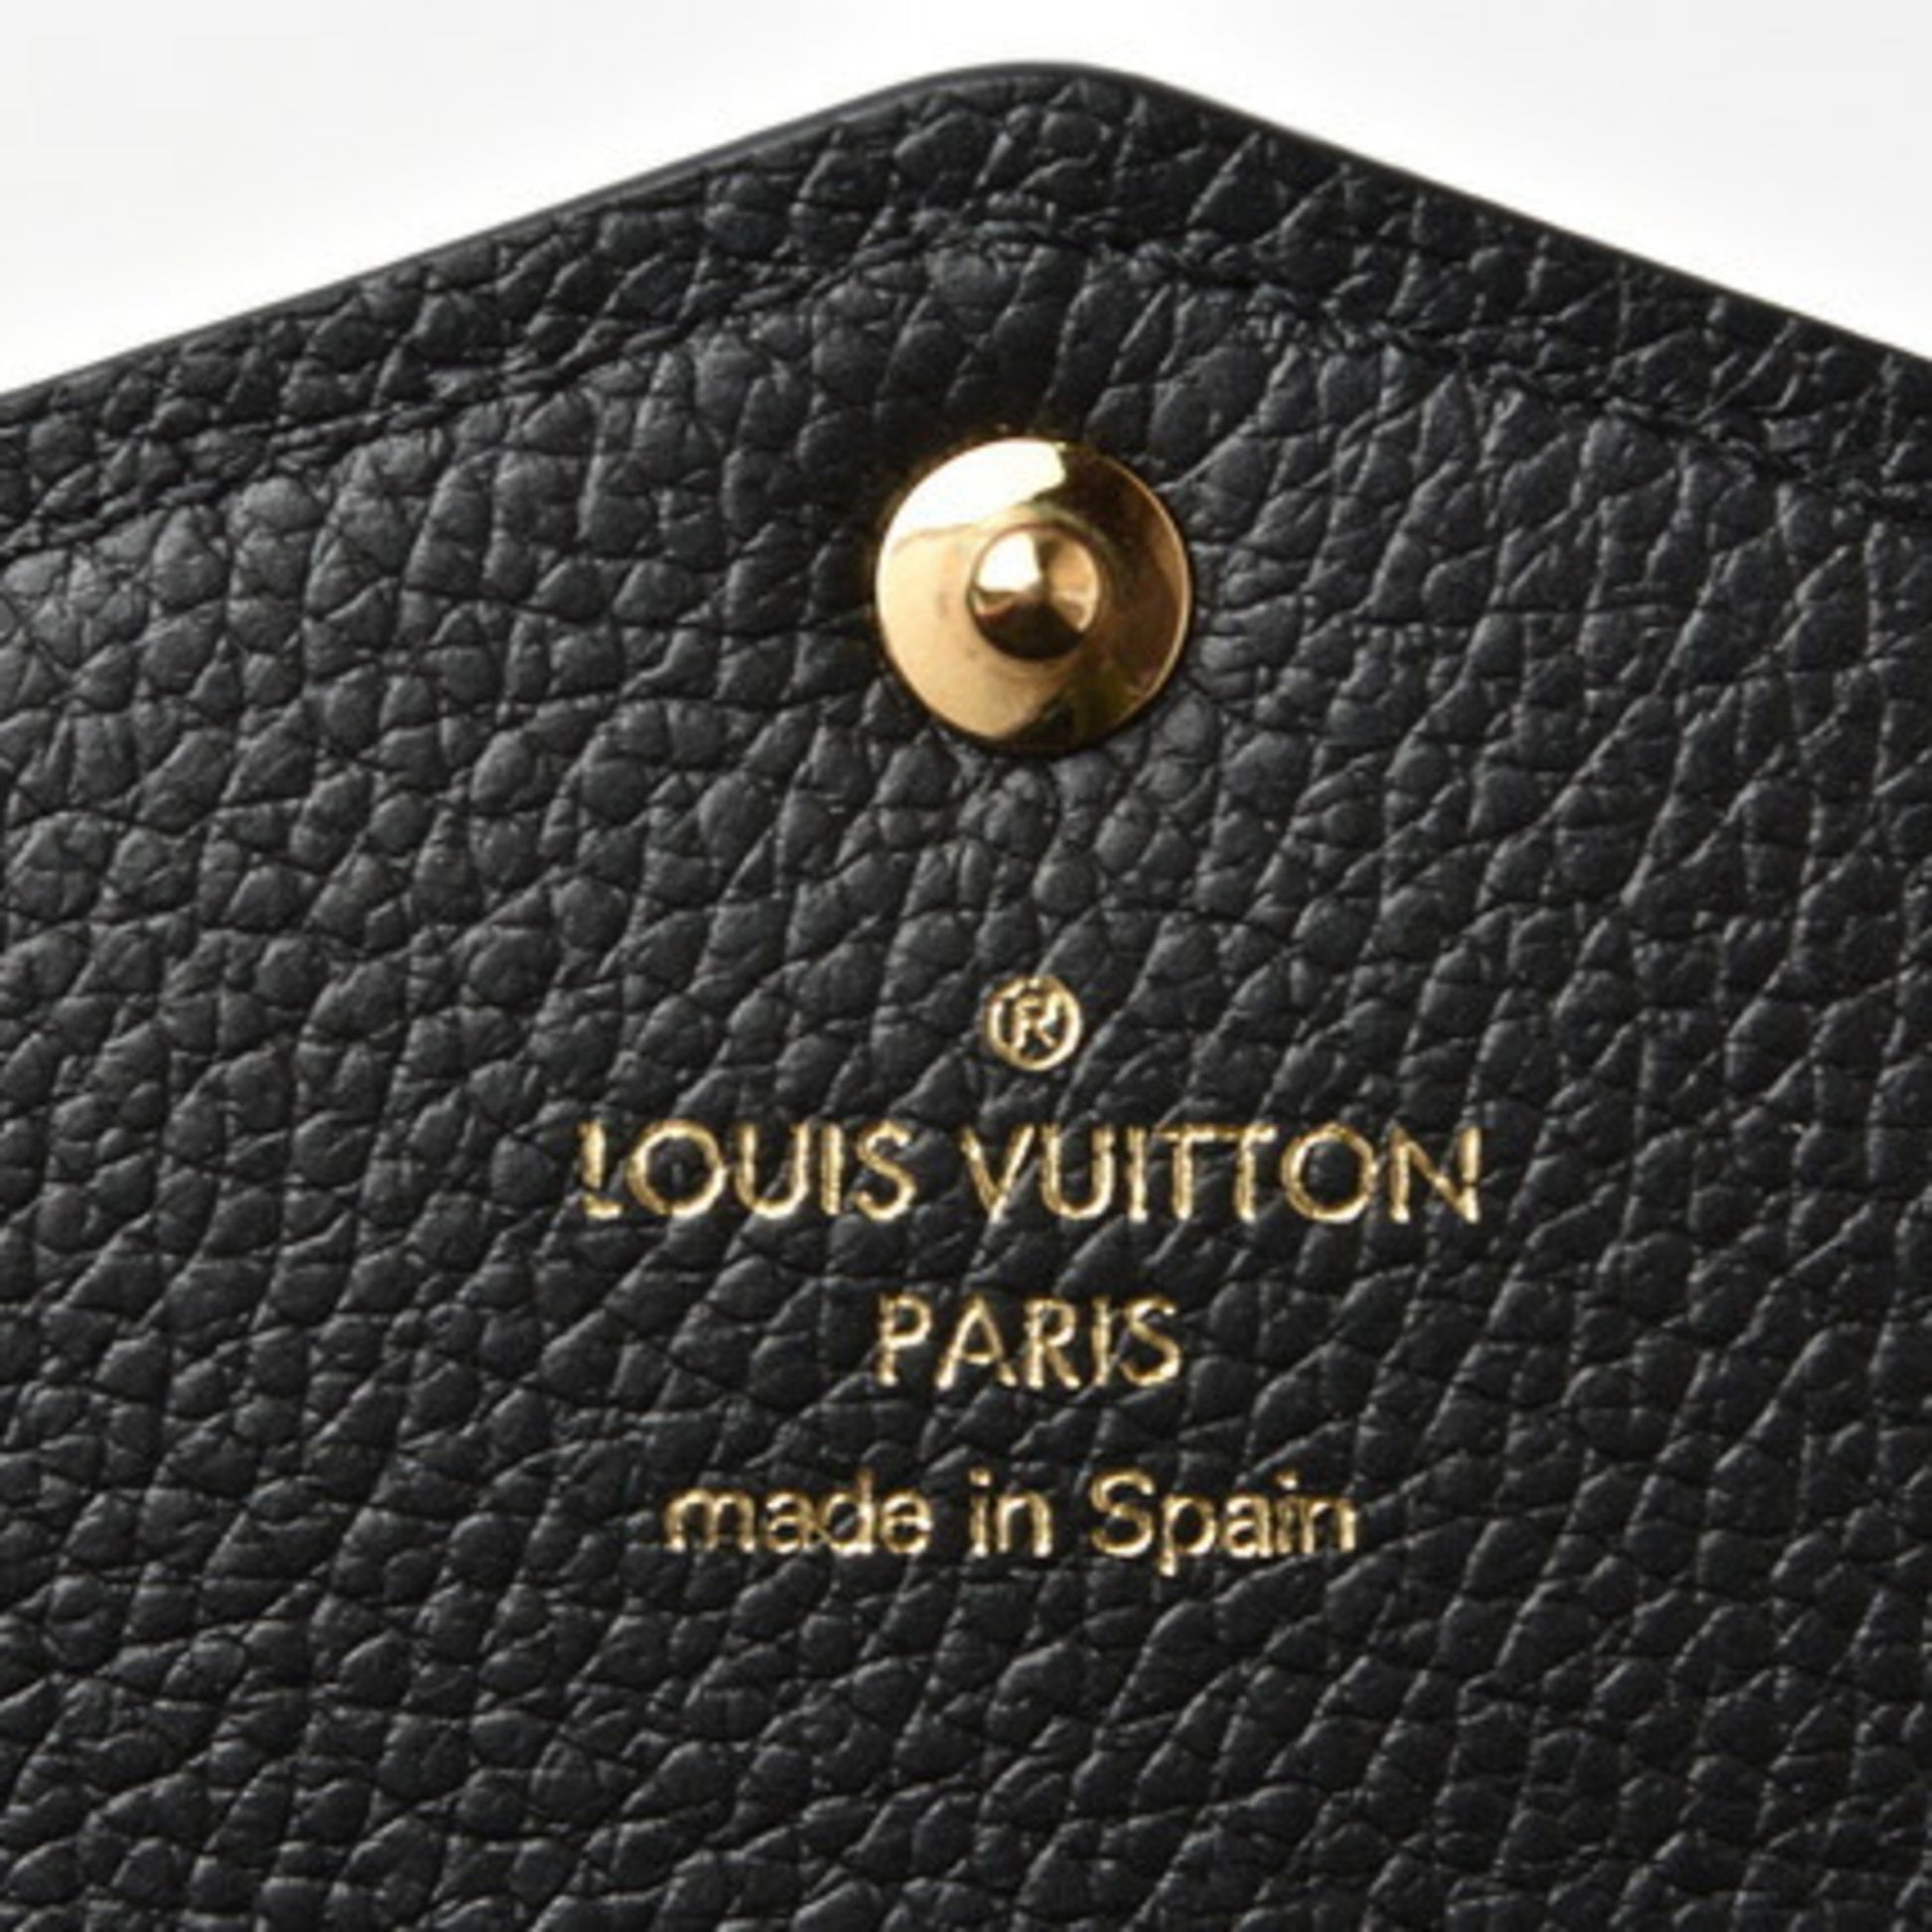 Buy [Used] LOUIS VUITTON Portefeuille Viennois Bifold Wallet Monogram  M61674 from Japan - Buy authentic Plus exclusive items from Japan